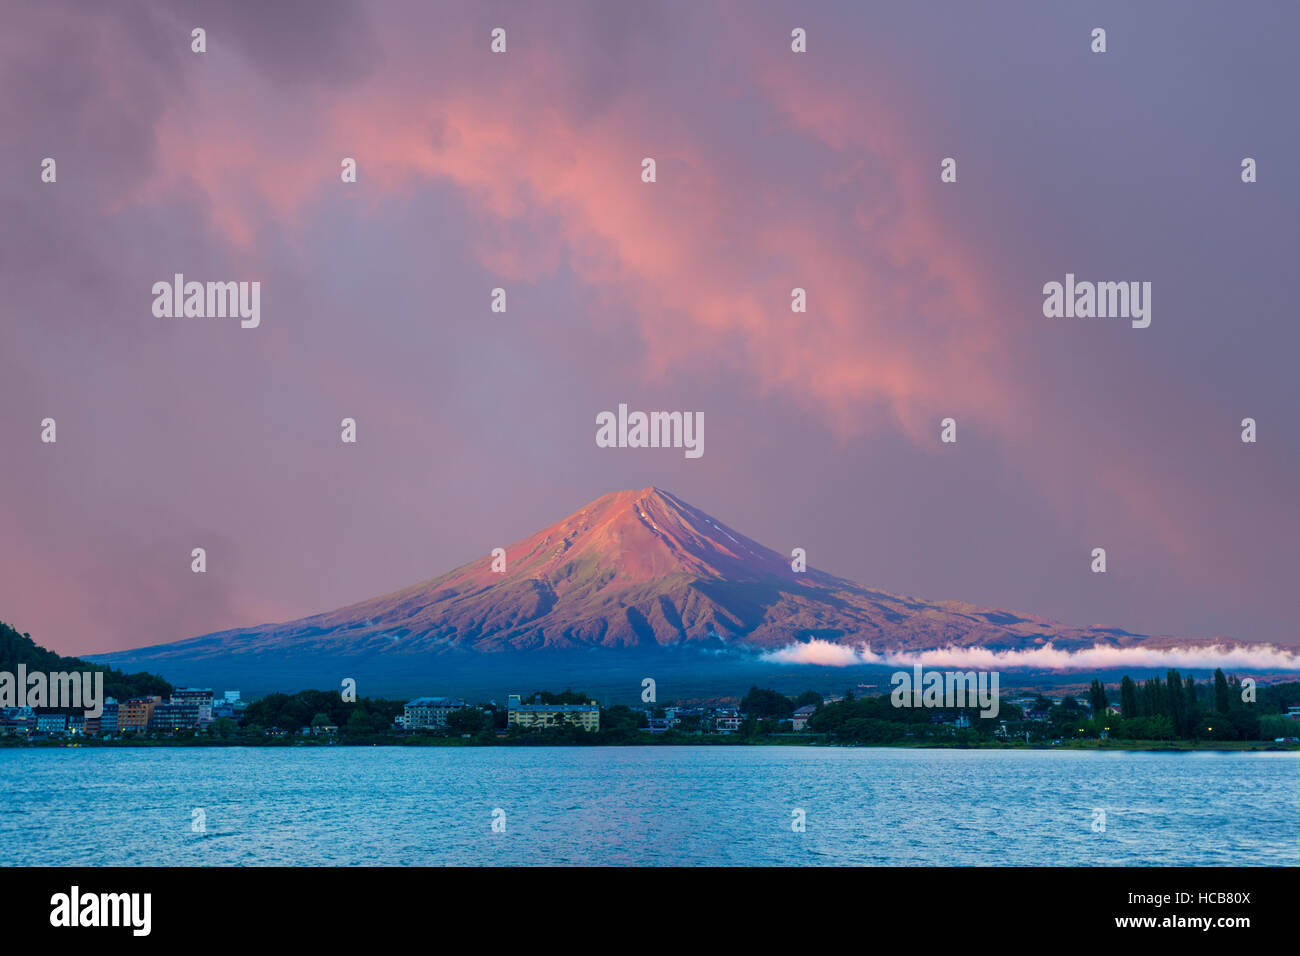 Colorful pink sunrise sky above the bright red volcanic cone of Mount Fuji with line of lake shore hotels in foreground during s Stock Photo